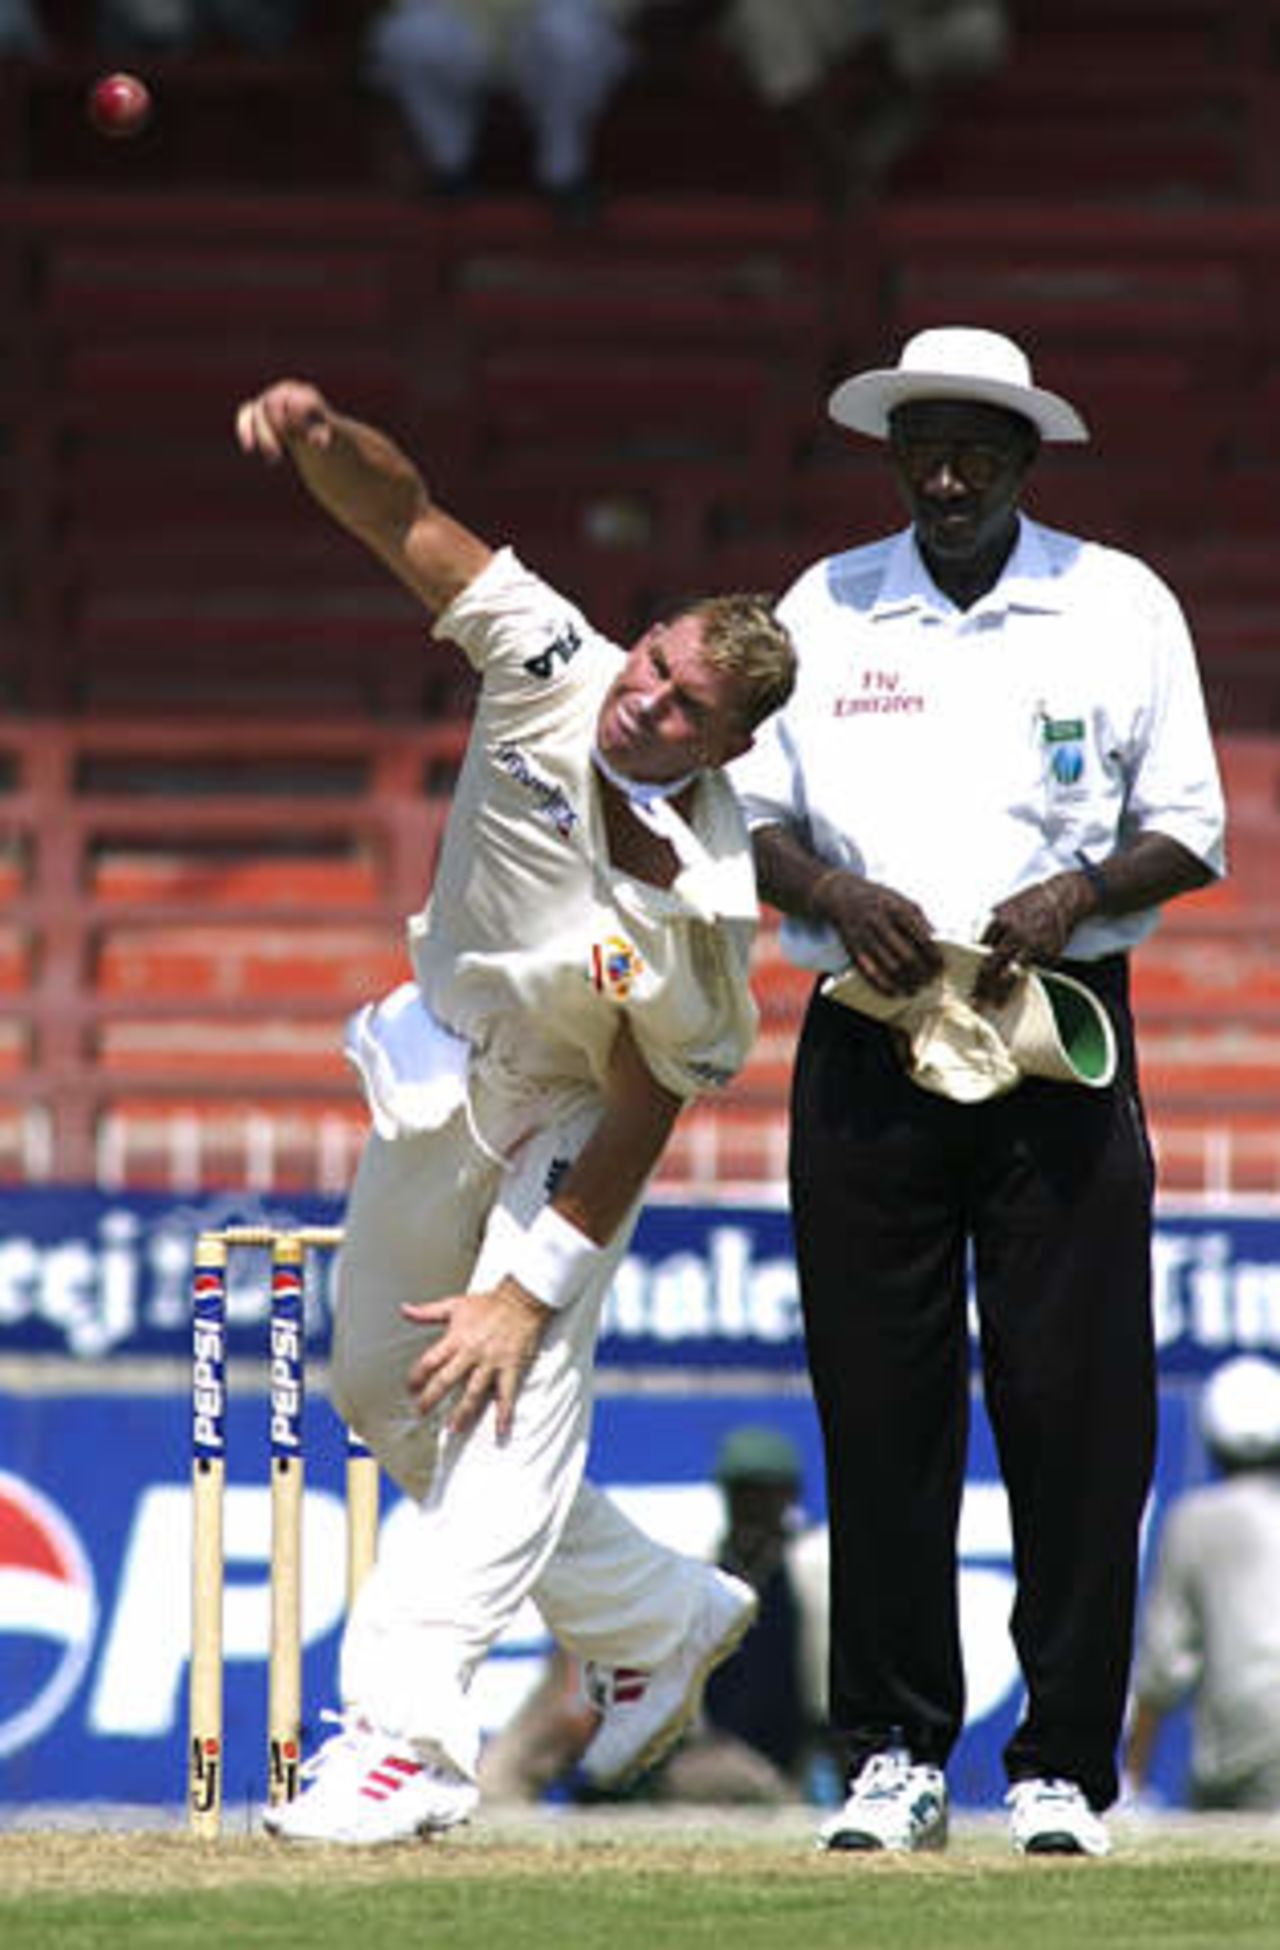 Australia leg spinner Shane Warne bowls Pakistan captain Waqar Younis LBW, as umpire Steve Bucknor (R) watches during their second cricket test at Sharjah's stadium October 11, 2002. The second and third tests are being held in the neutral venue of Sharjah after Australia balked at playing in Pakistan due to security concerns.